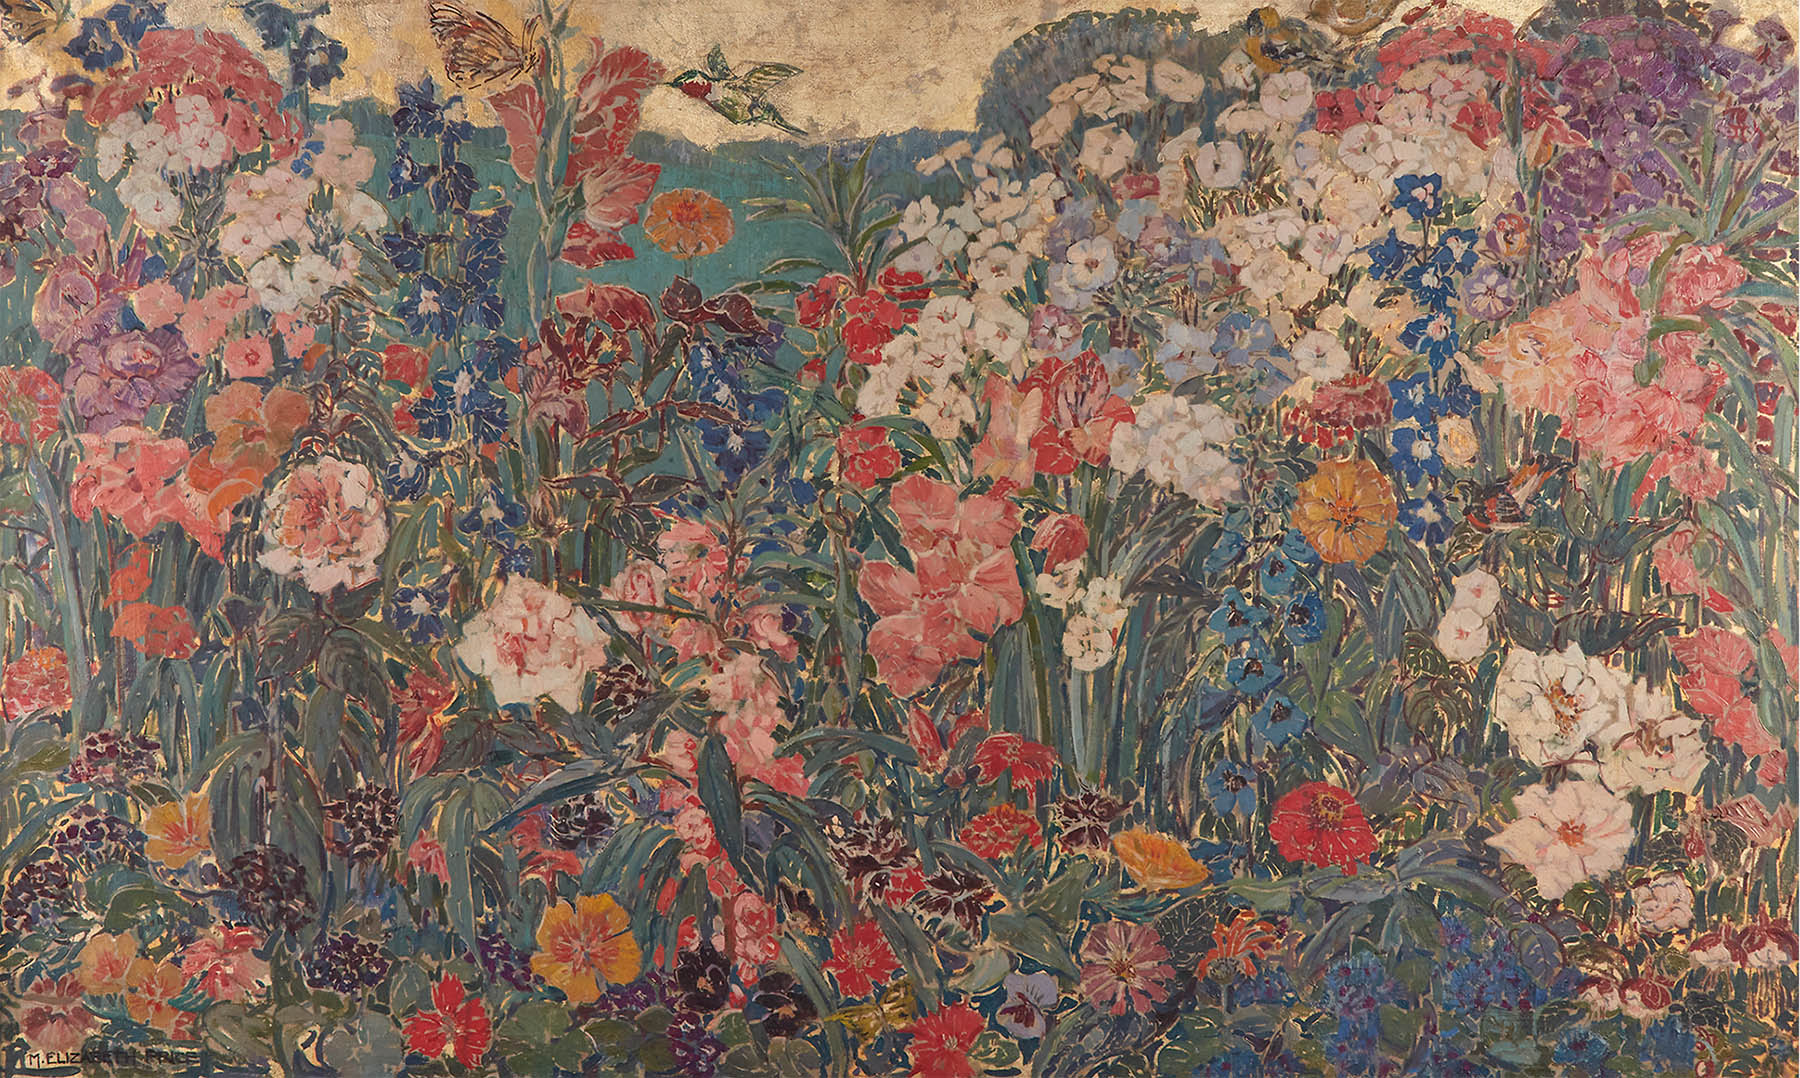 Mary Elizabeth Price painting, Mille Fleurs